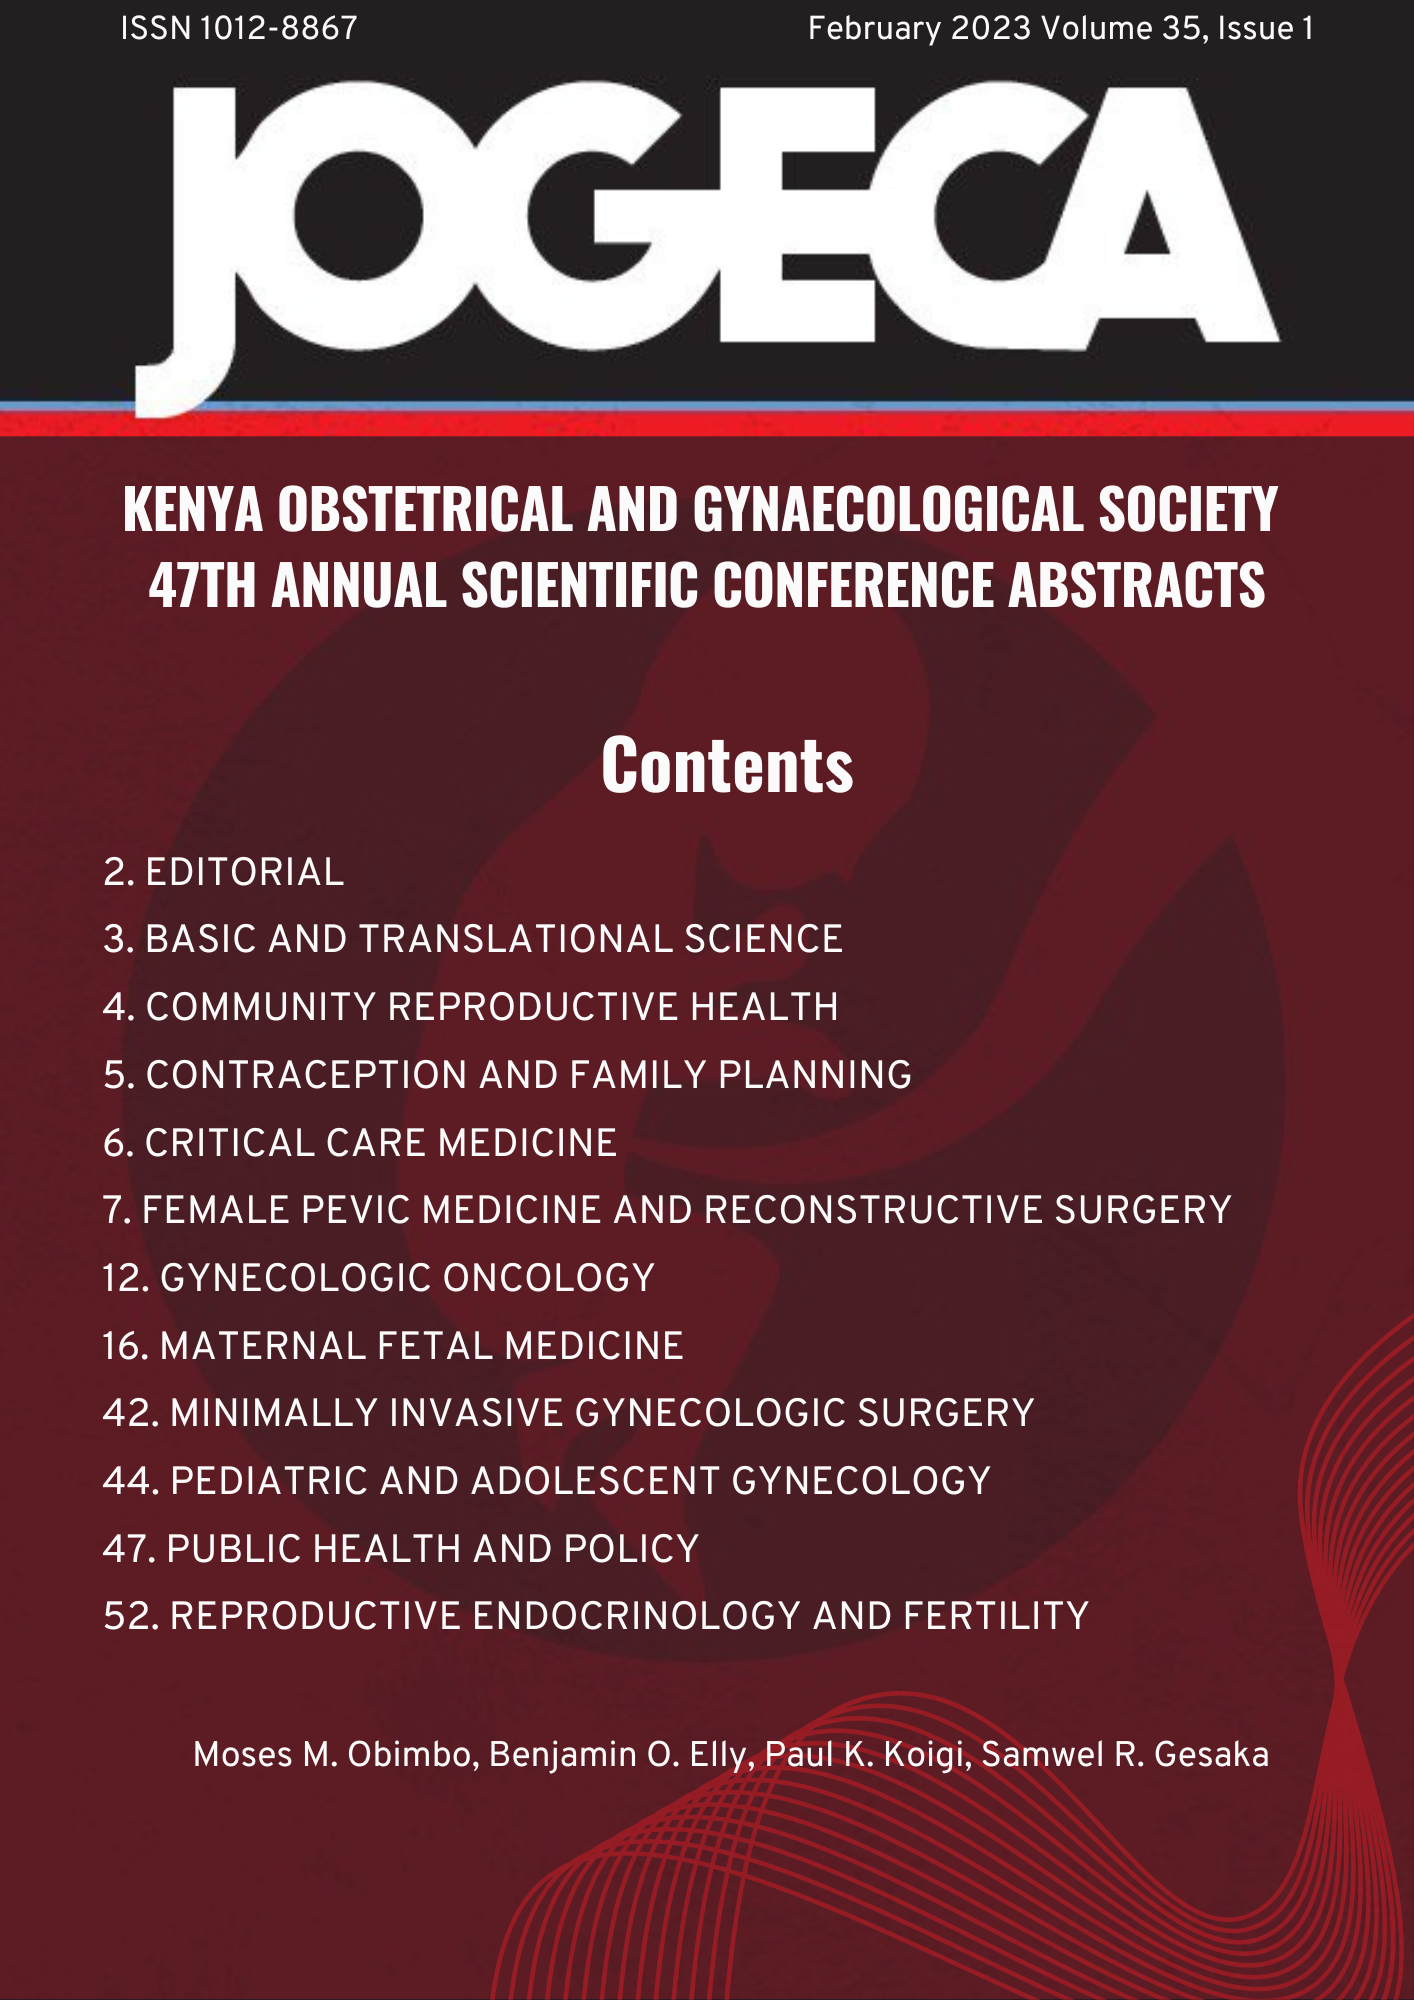 47th Kenya Obstetrical and Gynaecological Society Annual Scientific Congress Abtracts